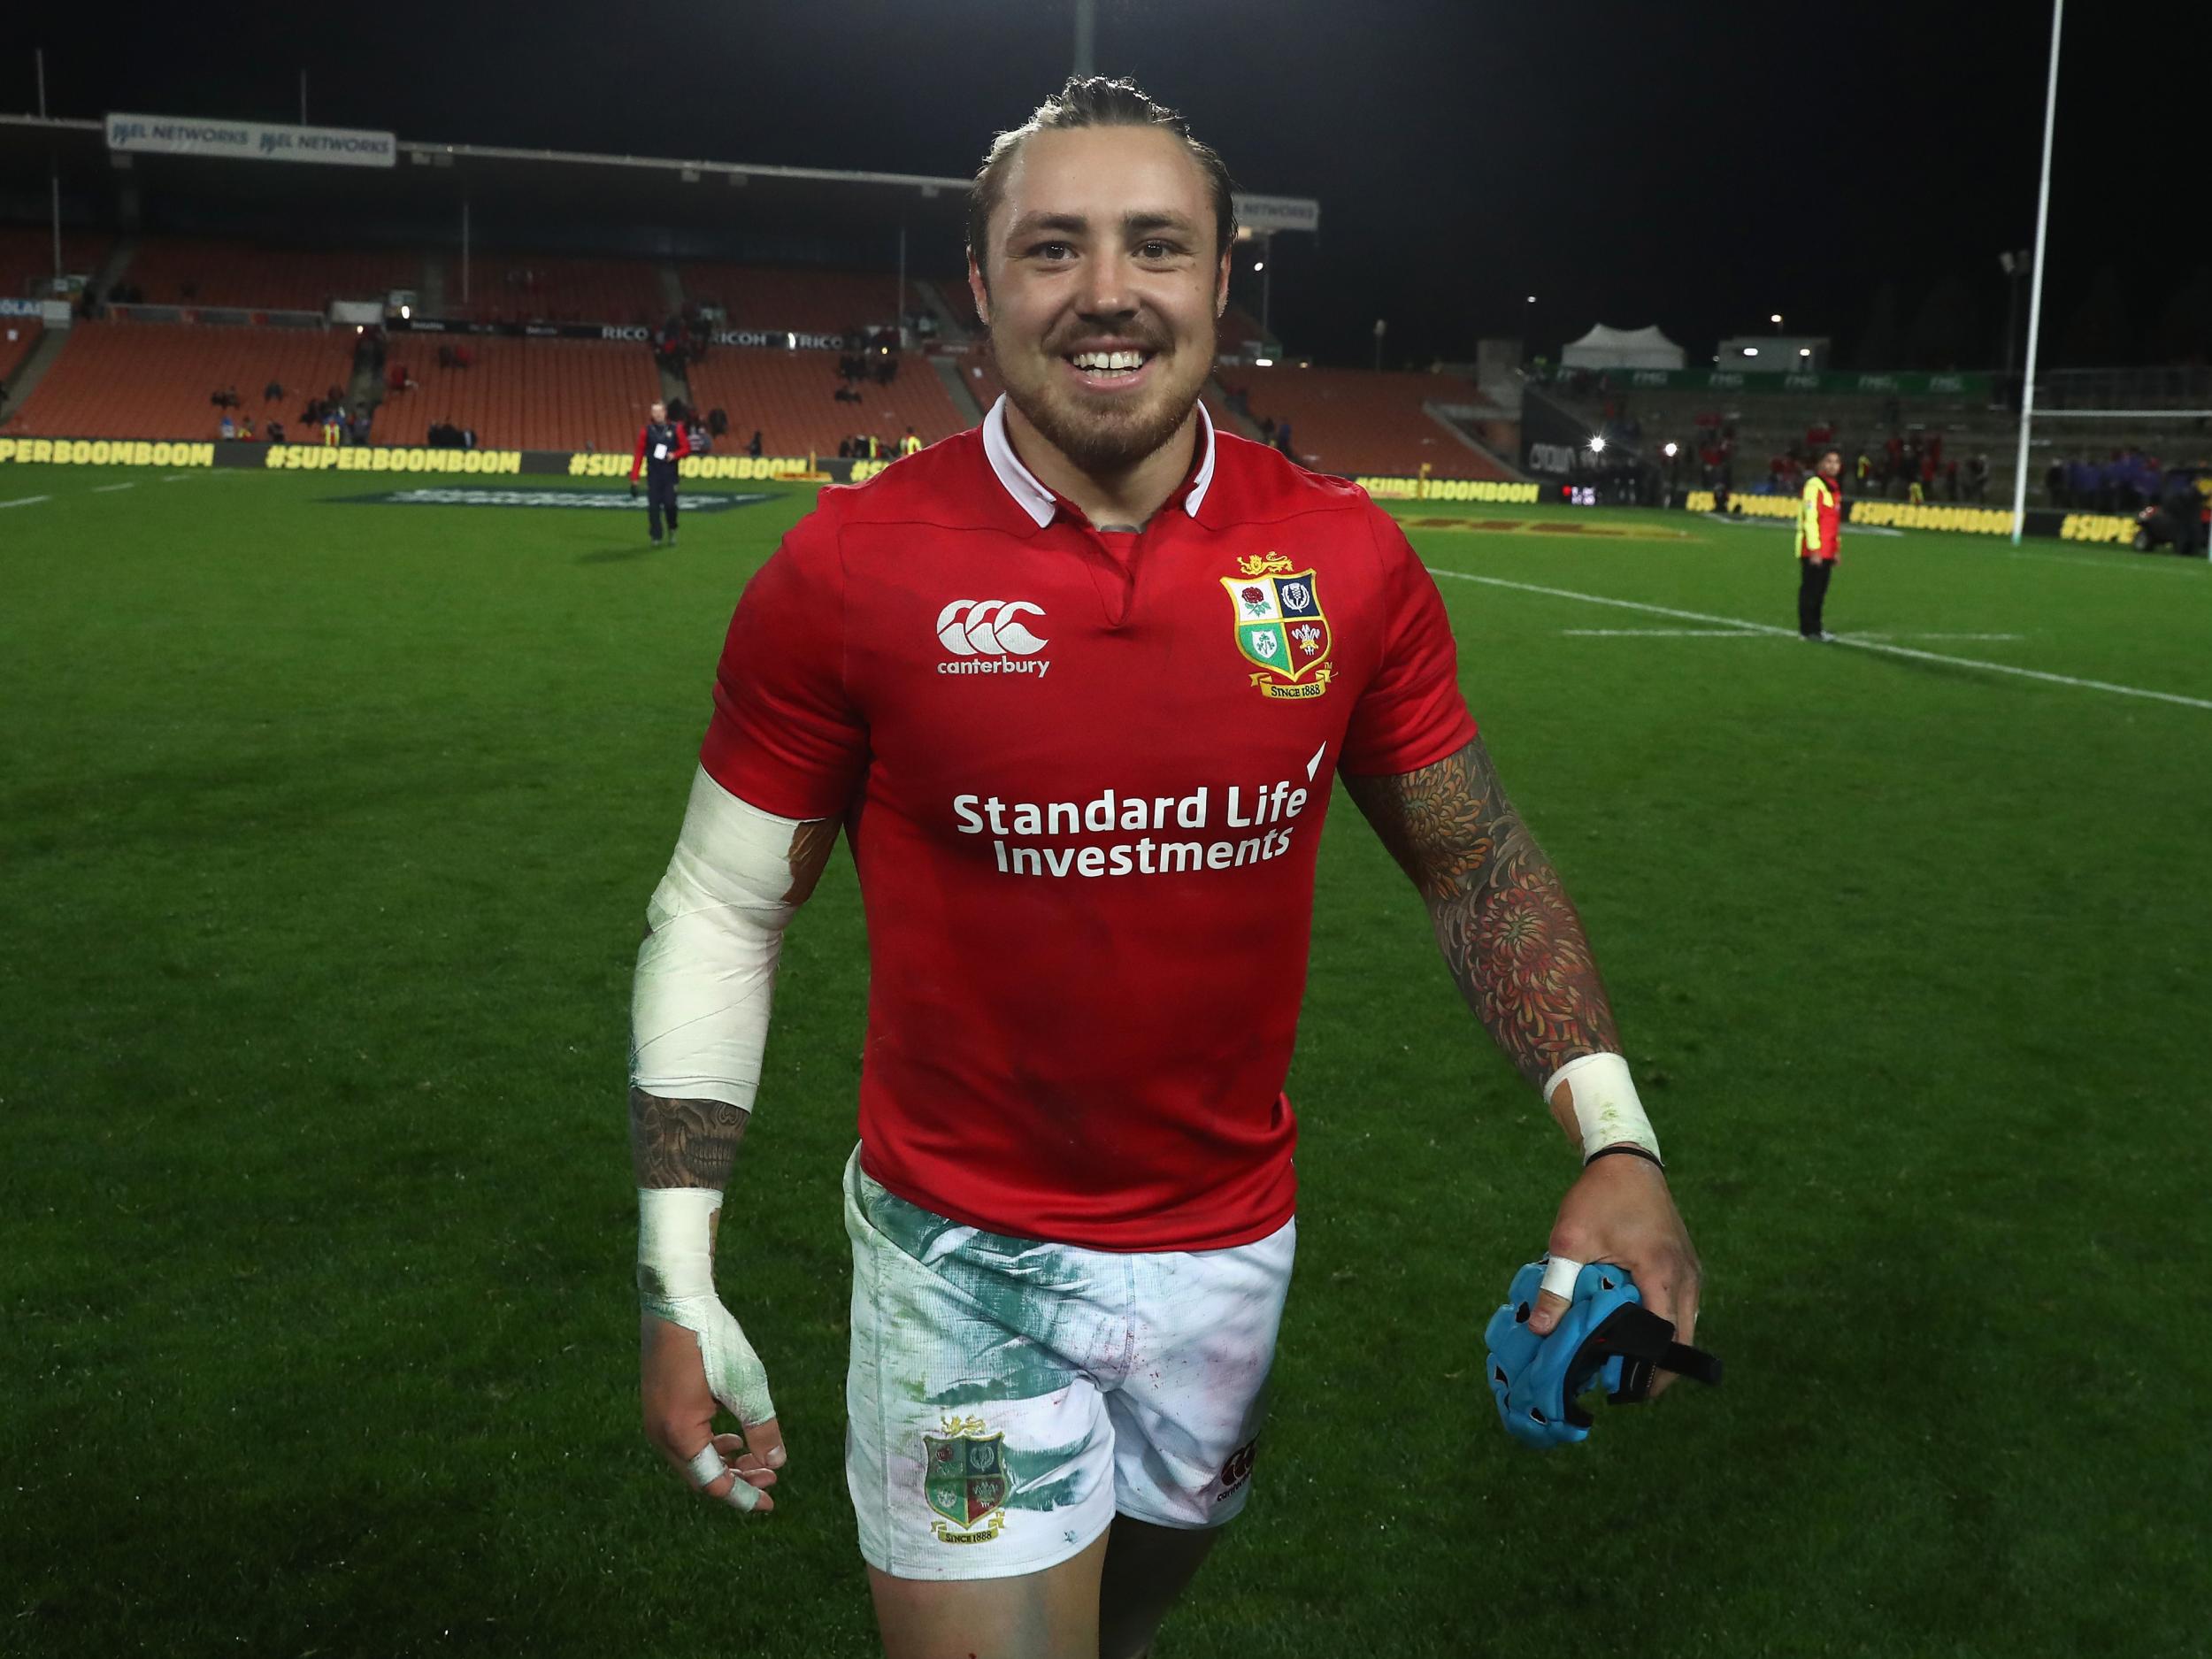 Nowell was scintillating in the dominant victory